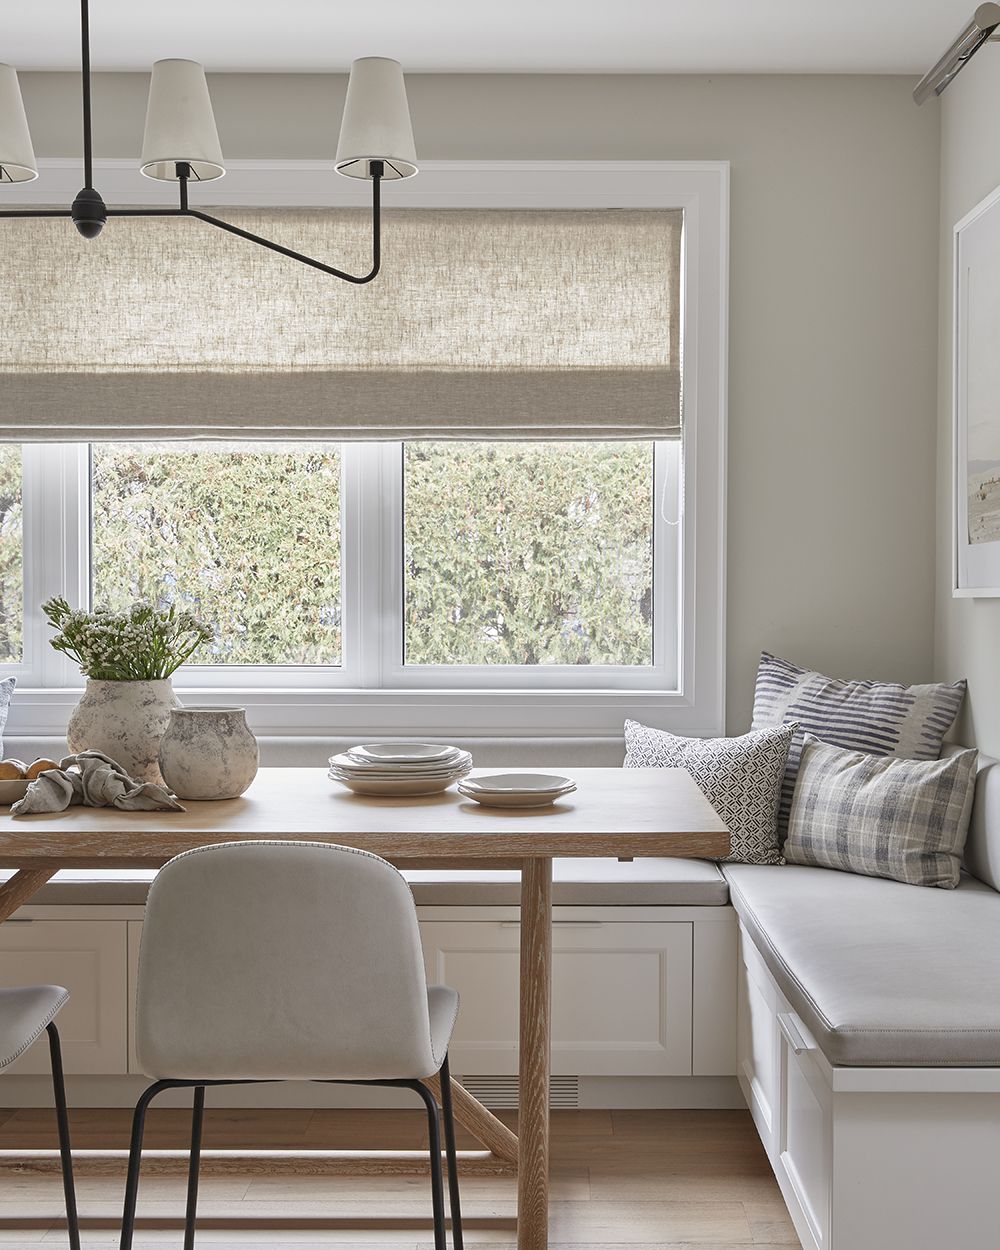 Breakfast Nooks and Banquettes Unlocking the Magic of Kitchen Space-Saving Ideas - 5 Kitchen Space-Saving Ideas